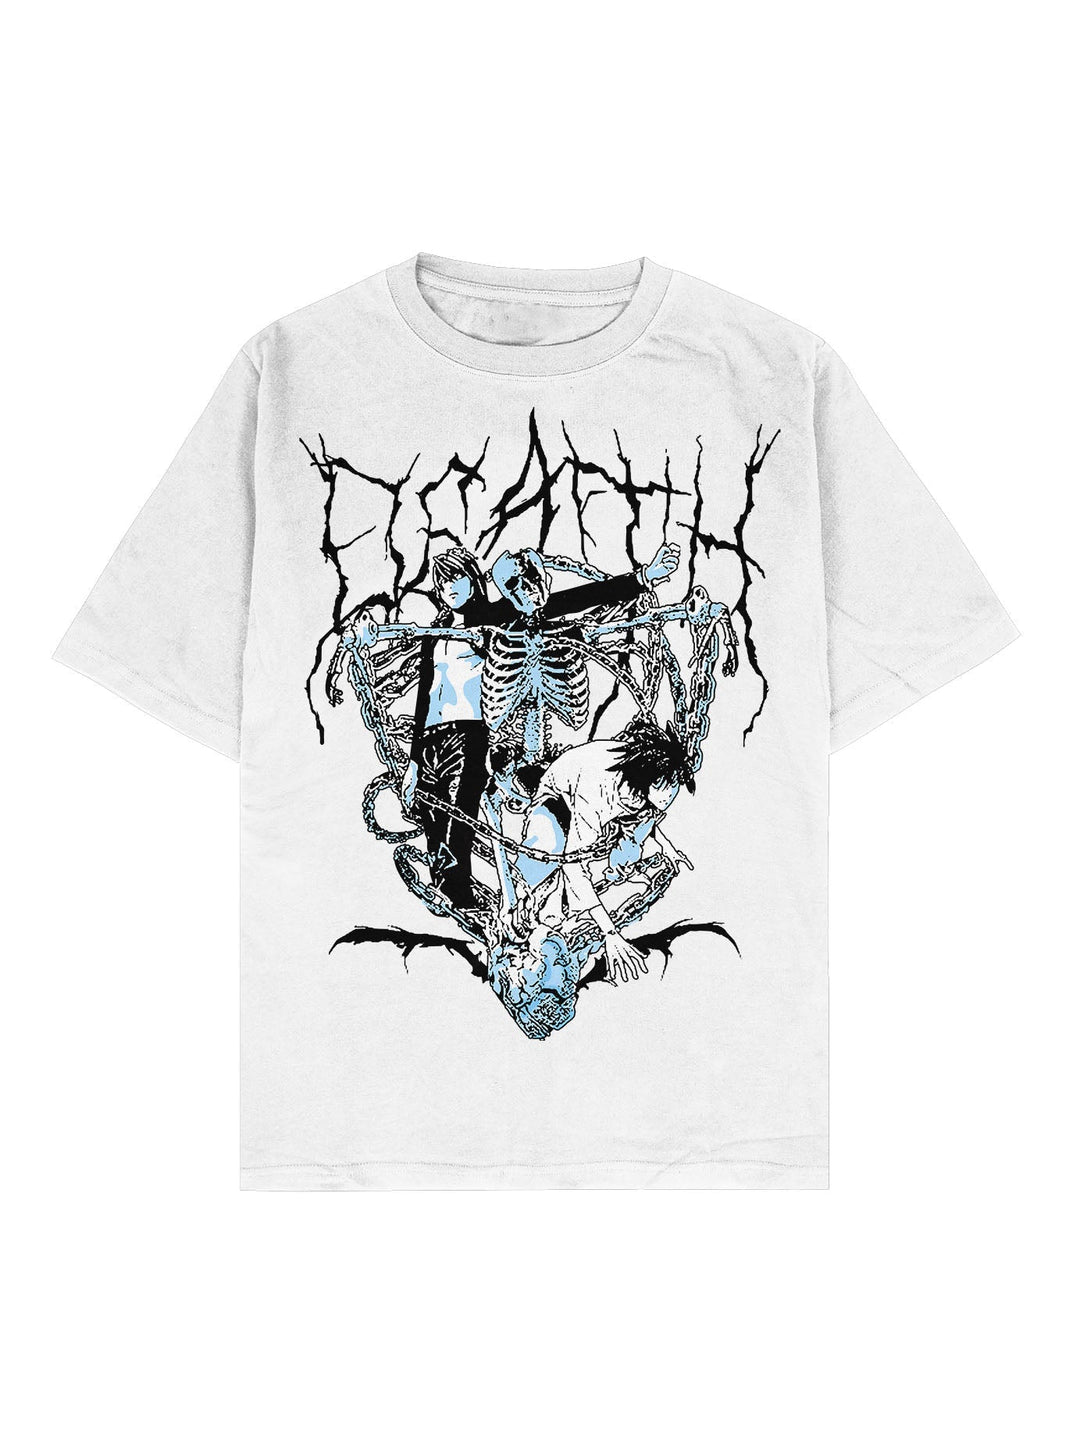 Death Note Oversized Shirt | ANIQI